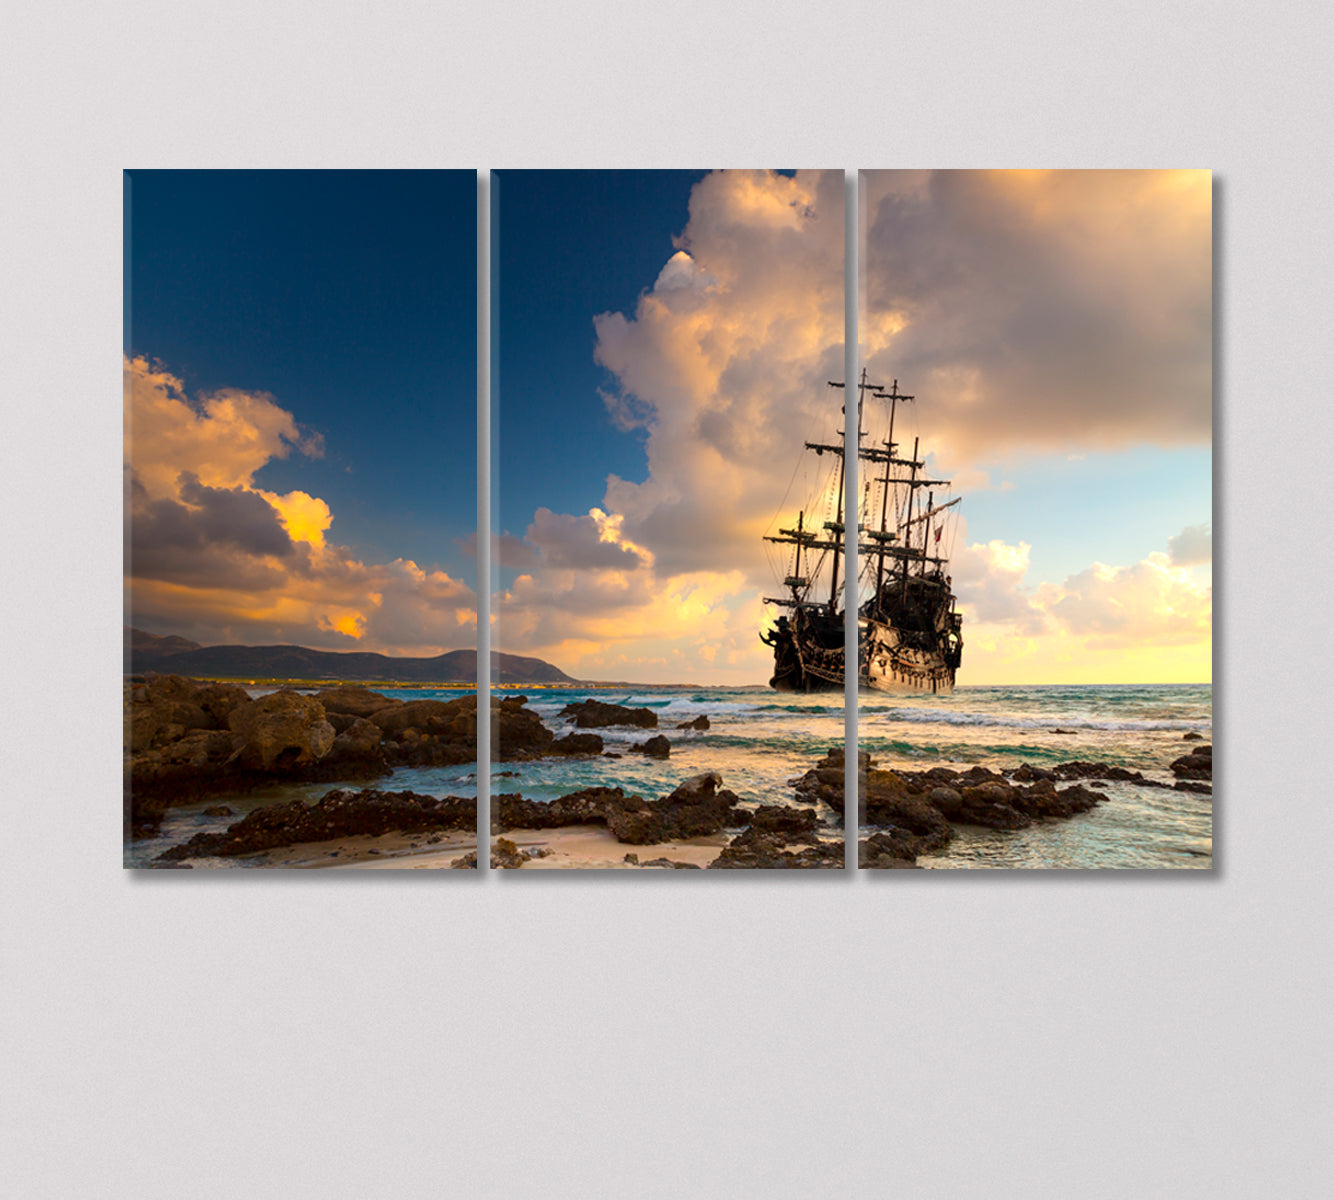 Old Pirate Ship at the Open Sea in Sunset Canvas Print-Canvas Print-CetArt-3 Panels-36x24 inches-CetArt